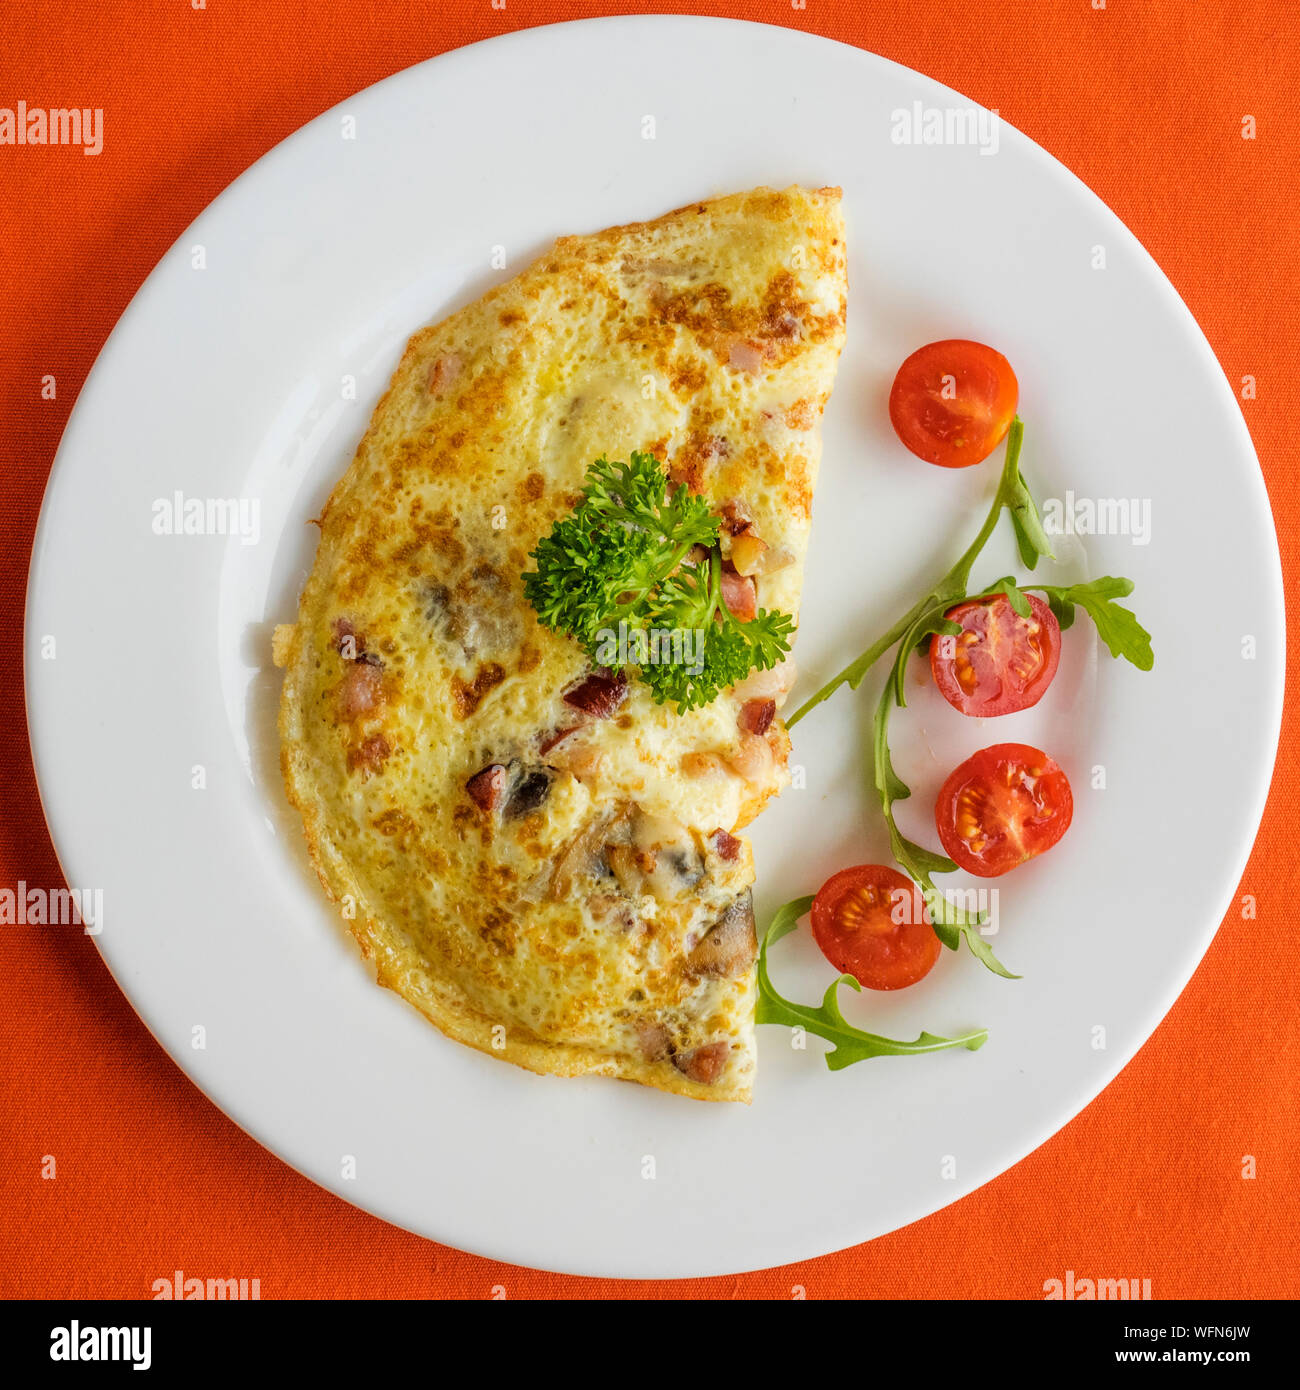 Close-up Of Omelet With Cherry Tomato Served In Plate On Table Stock Photo